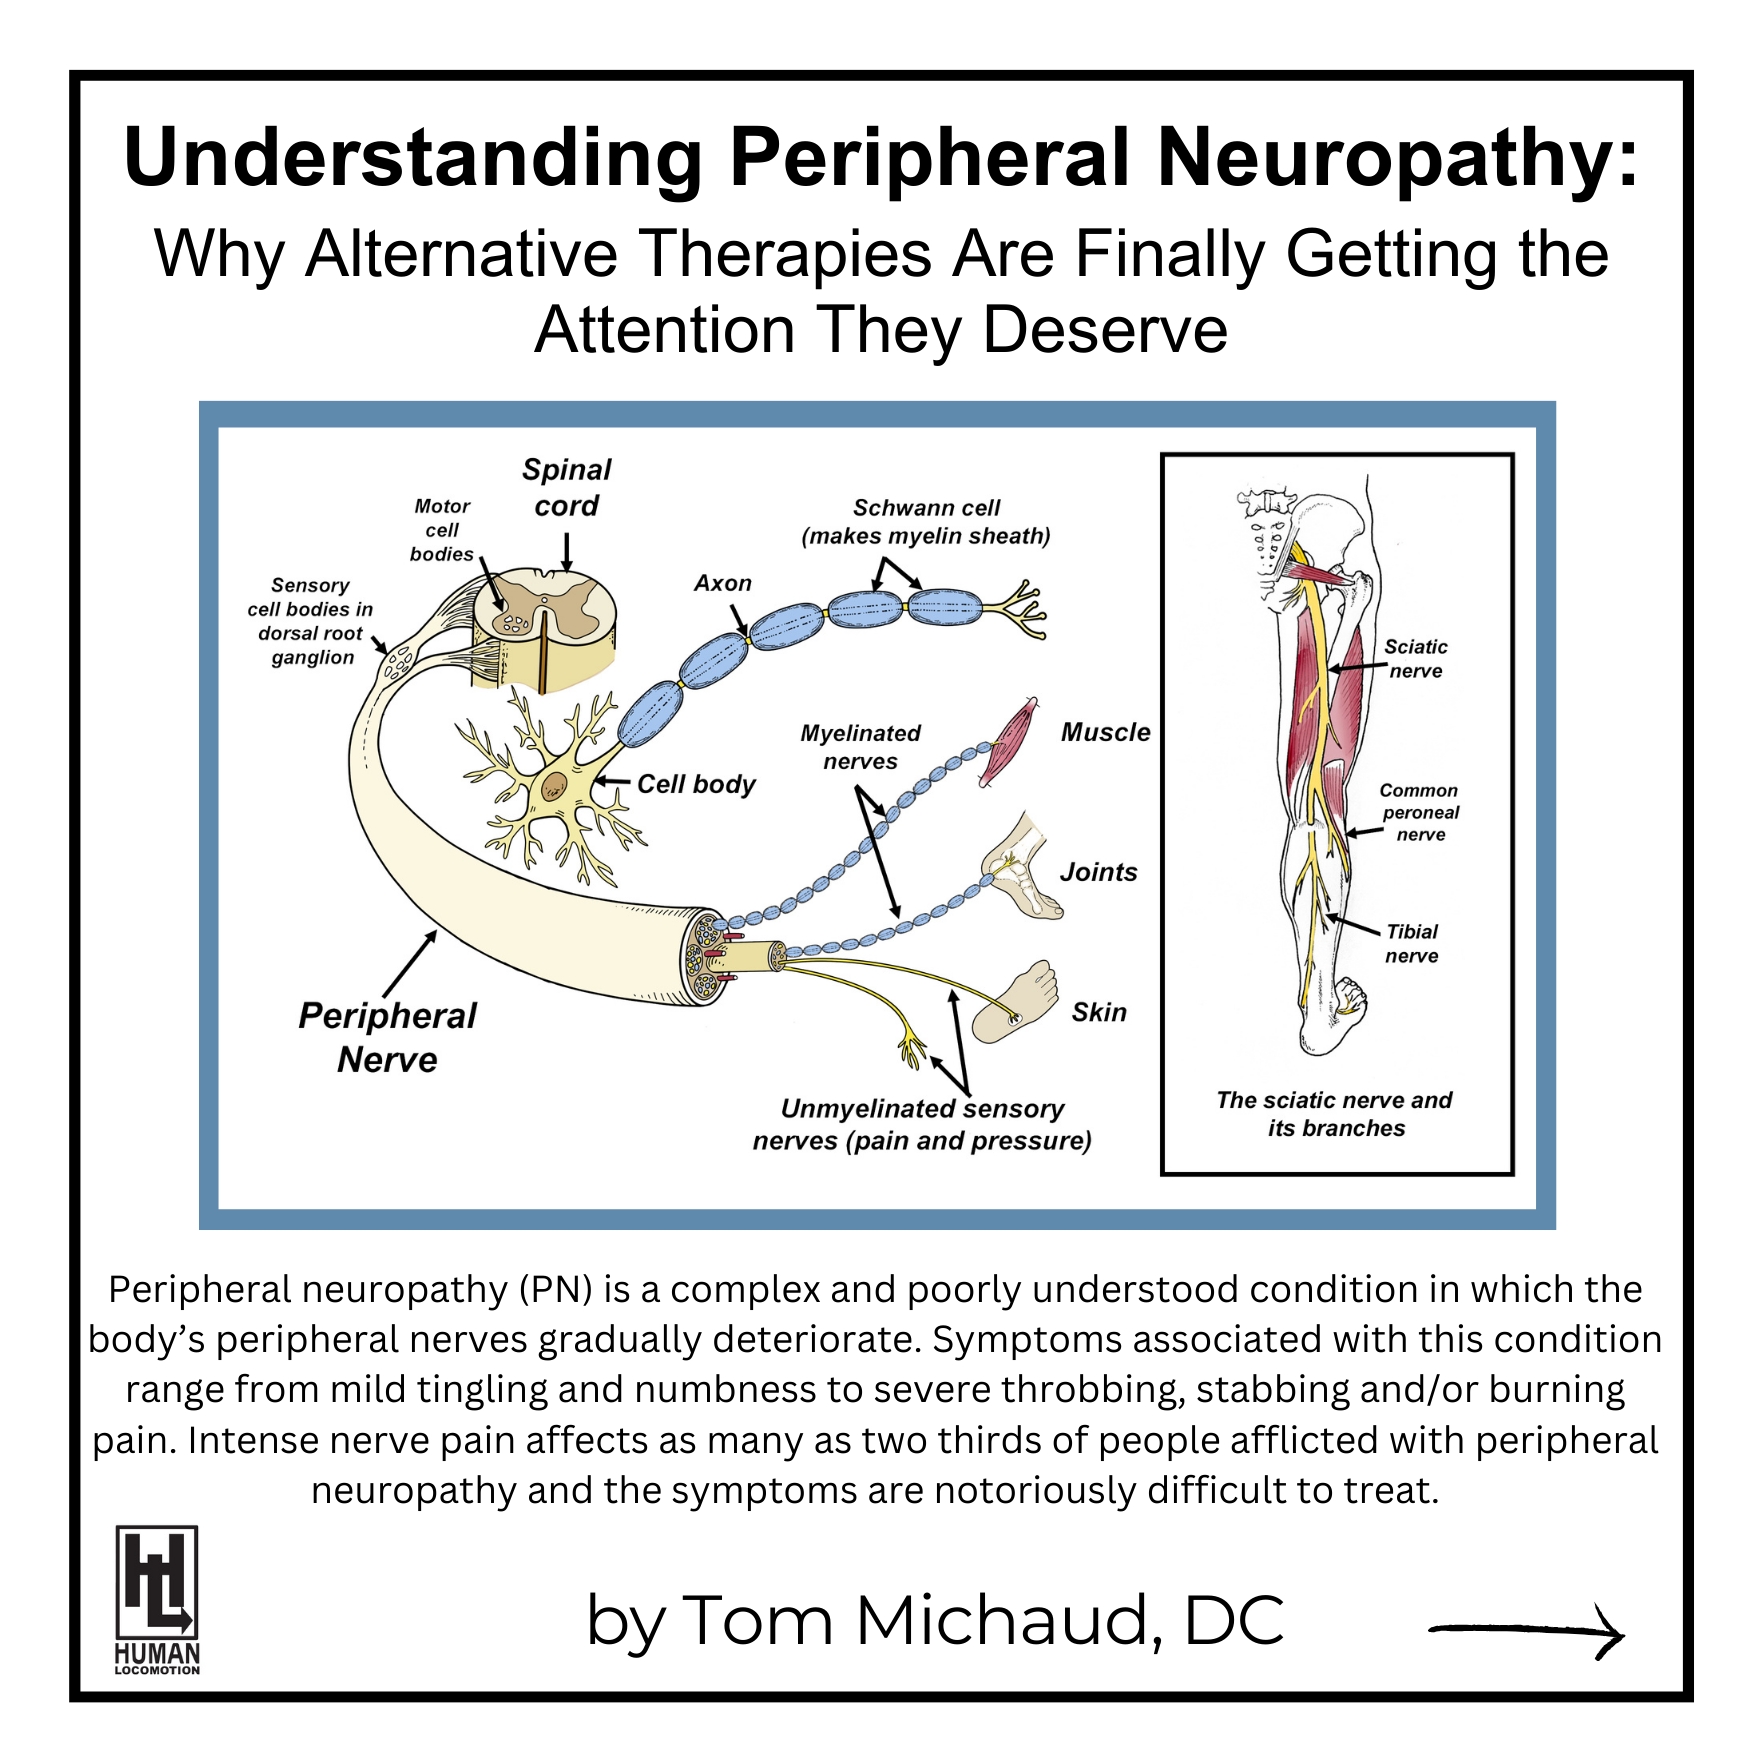 Understanding Peripheral Neuropathy: Why Alternative Therapies Are Finally Getting the Attention They Deserve